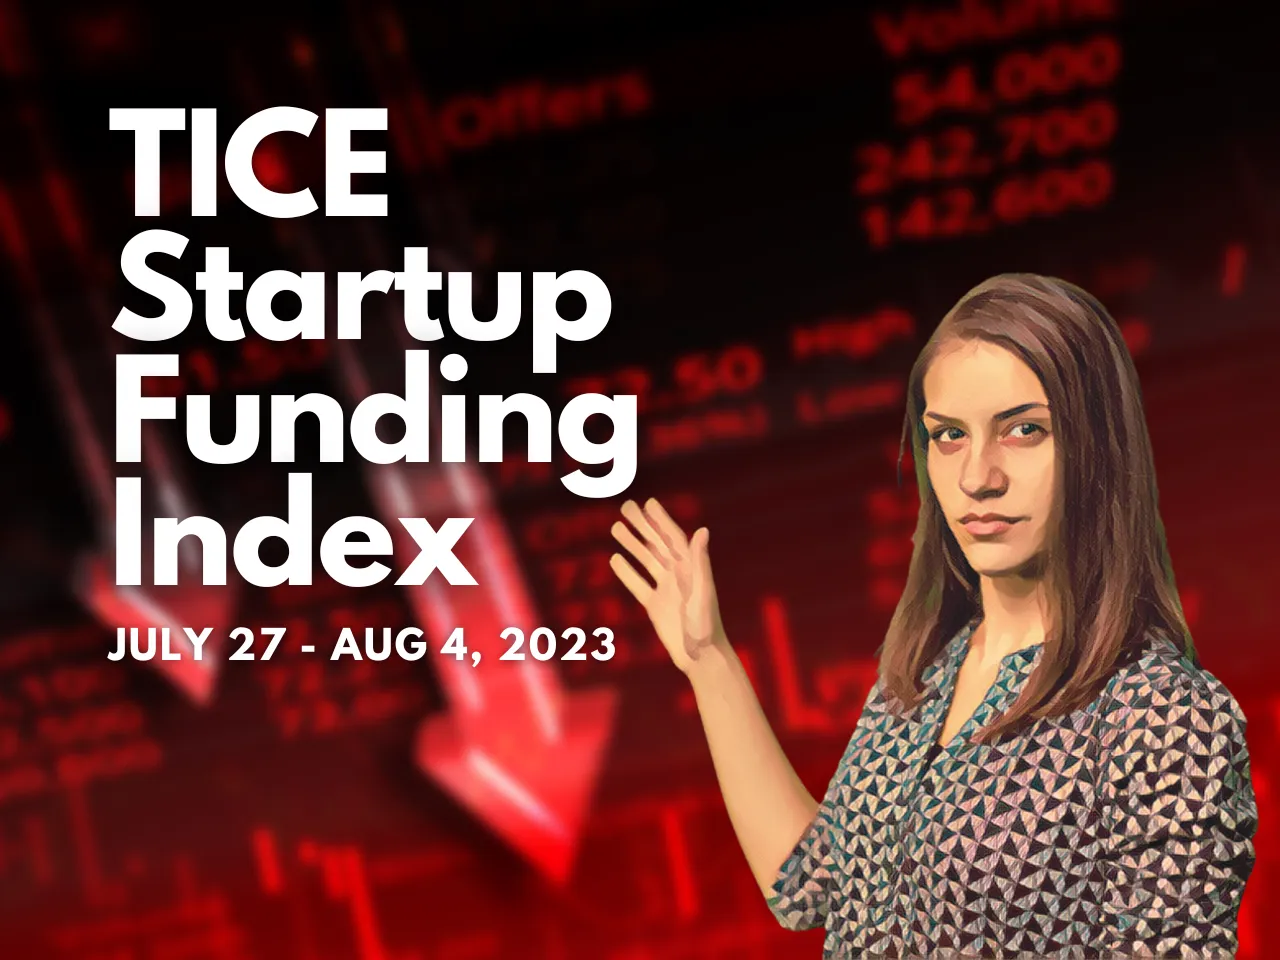 TICE Startup Funding Index: Indian Startups Raise $86.5M in Funding